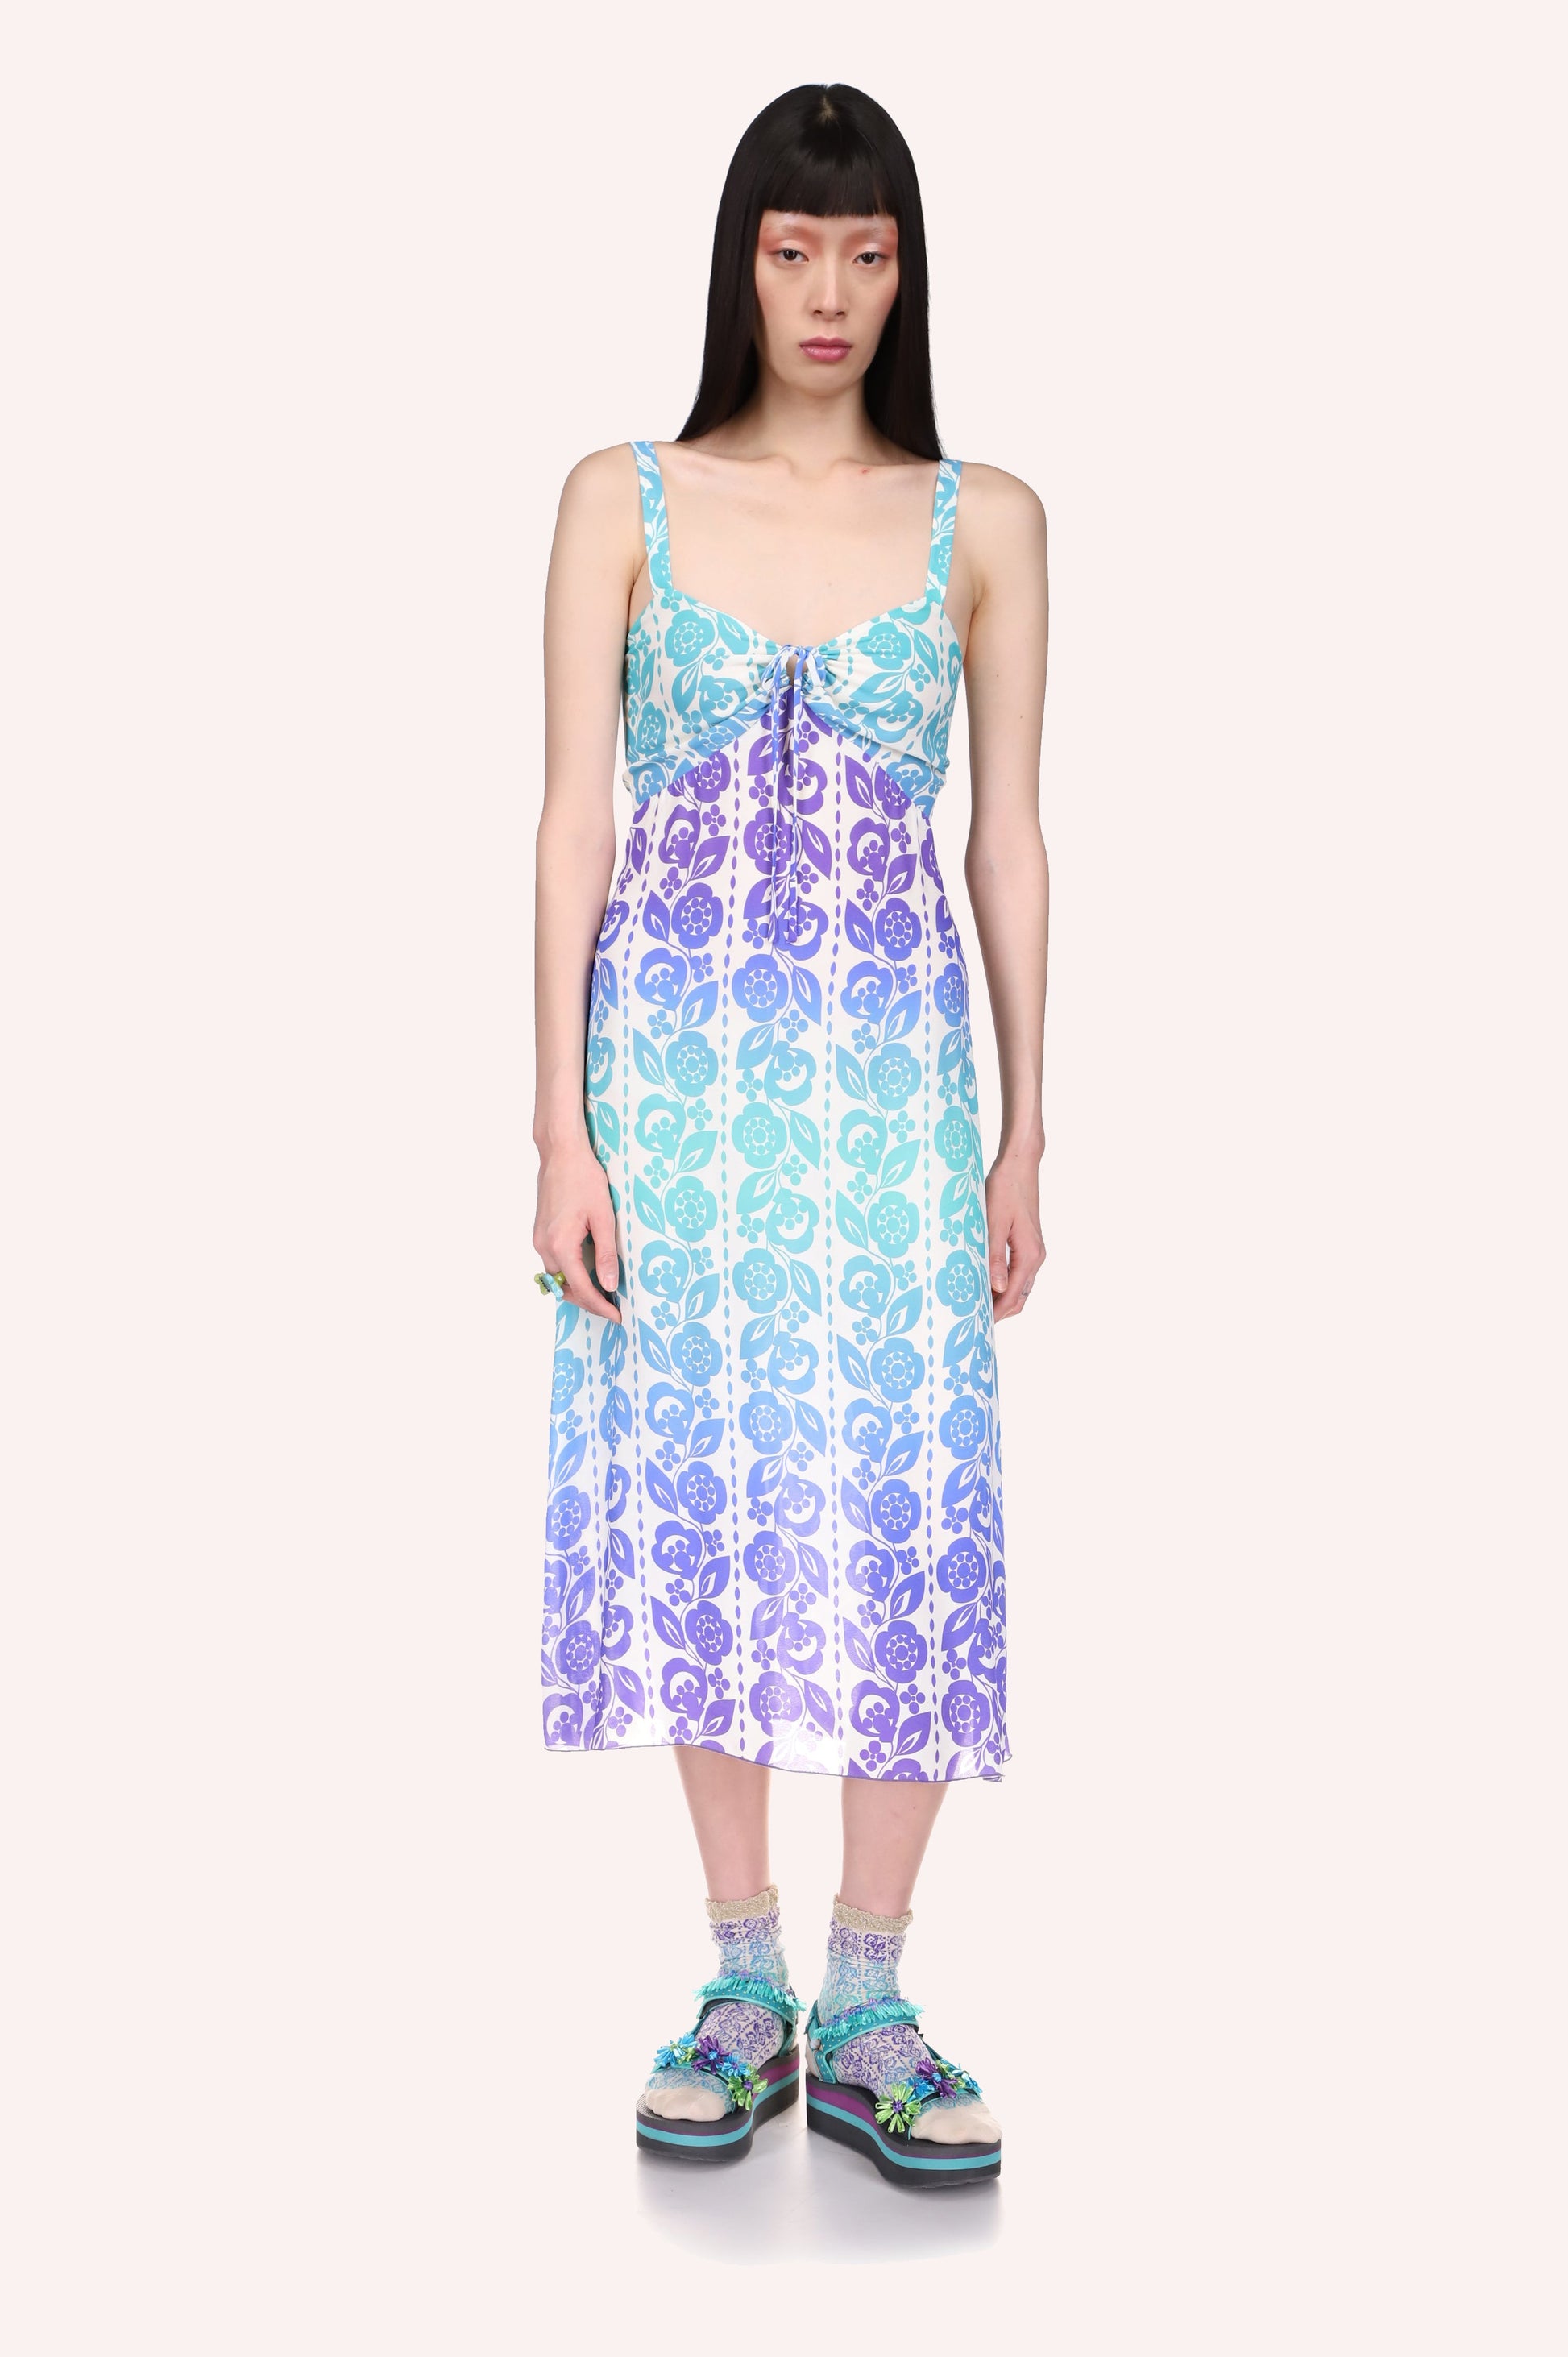 Radiant Ombre Slip Dress, mid-calf long, sleeveless, bluish floral design, ribbon knot in front